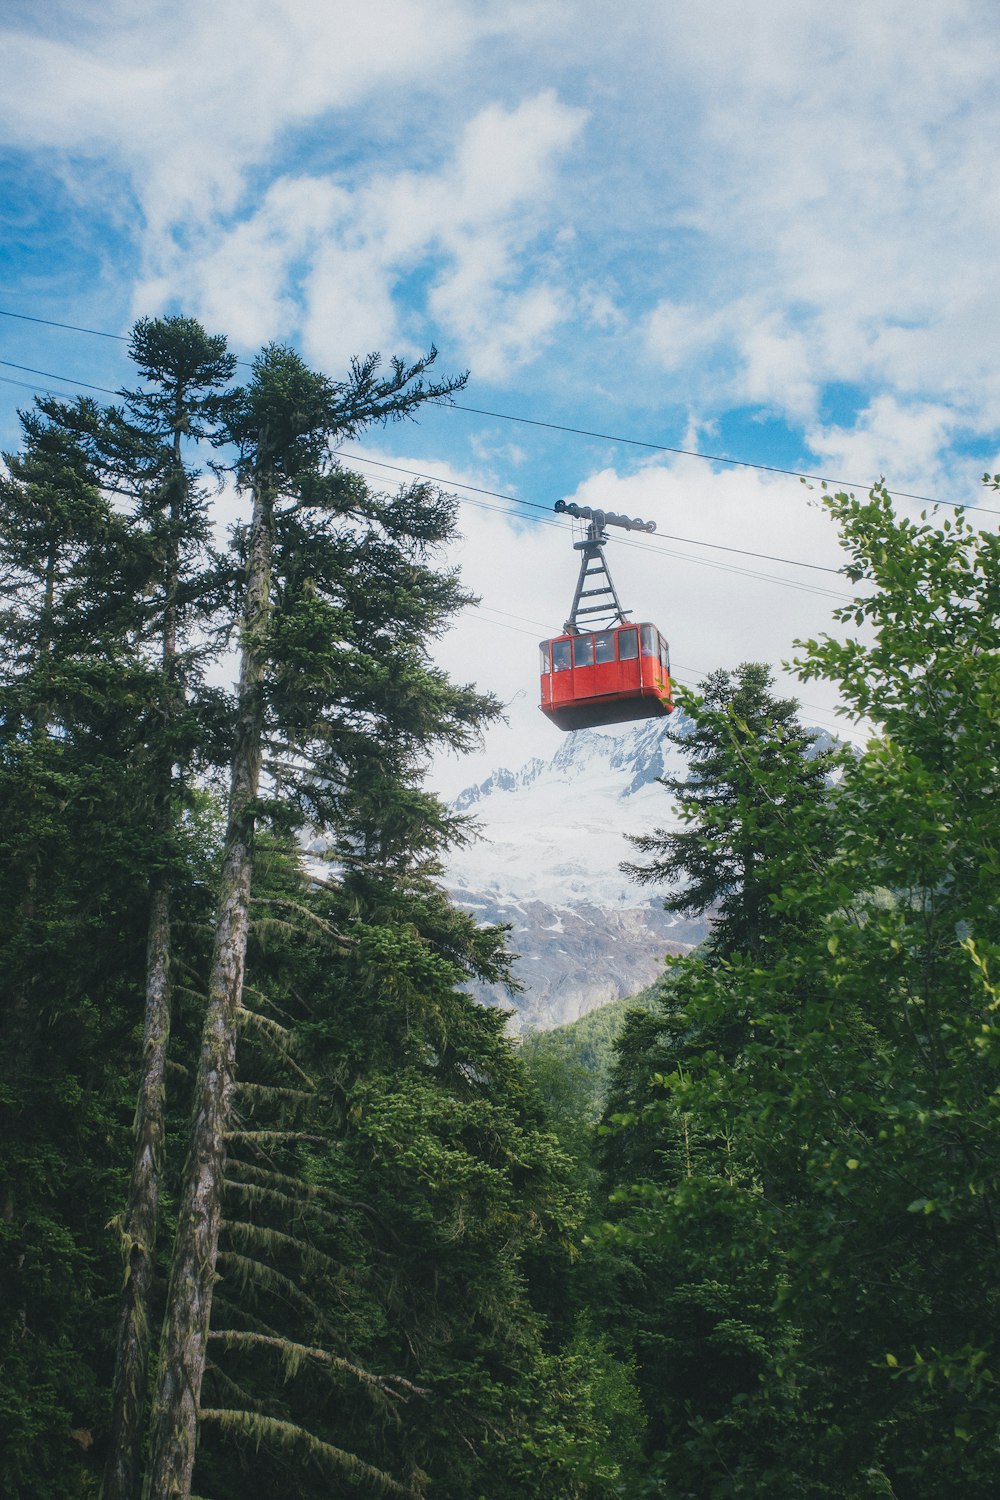 a ski lift going over a forest filled with trees